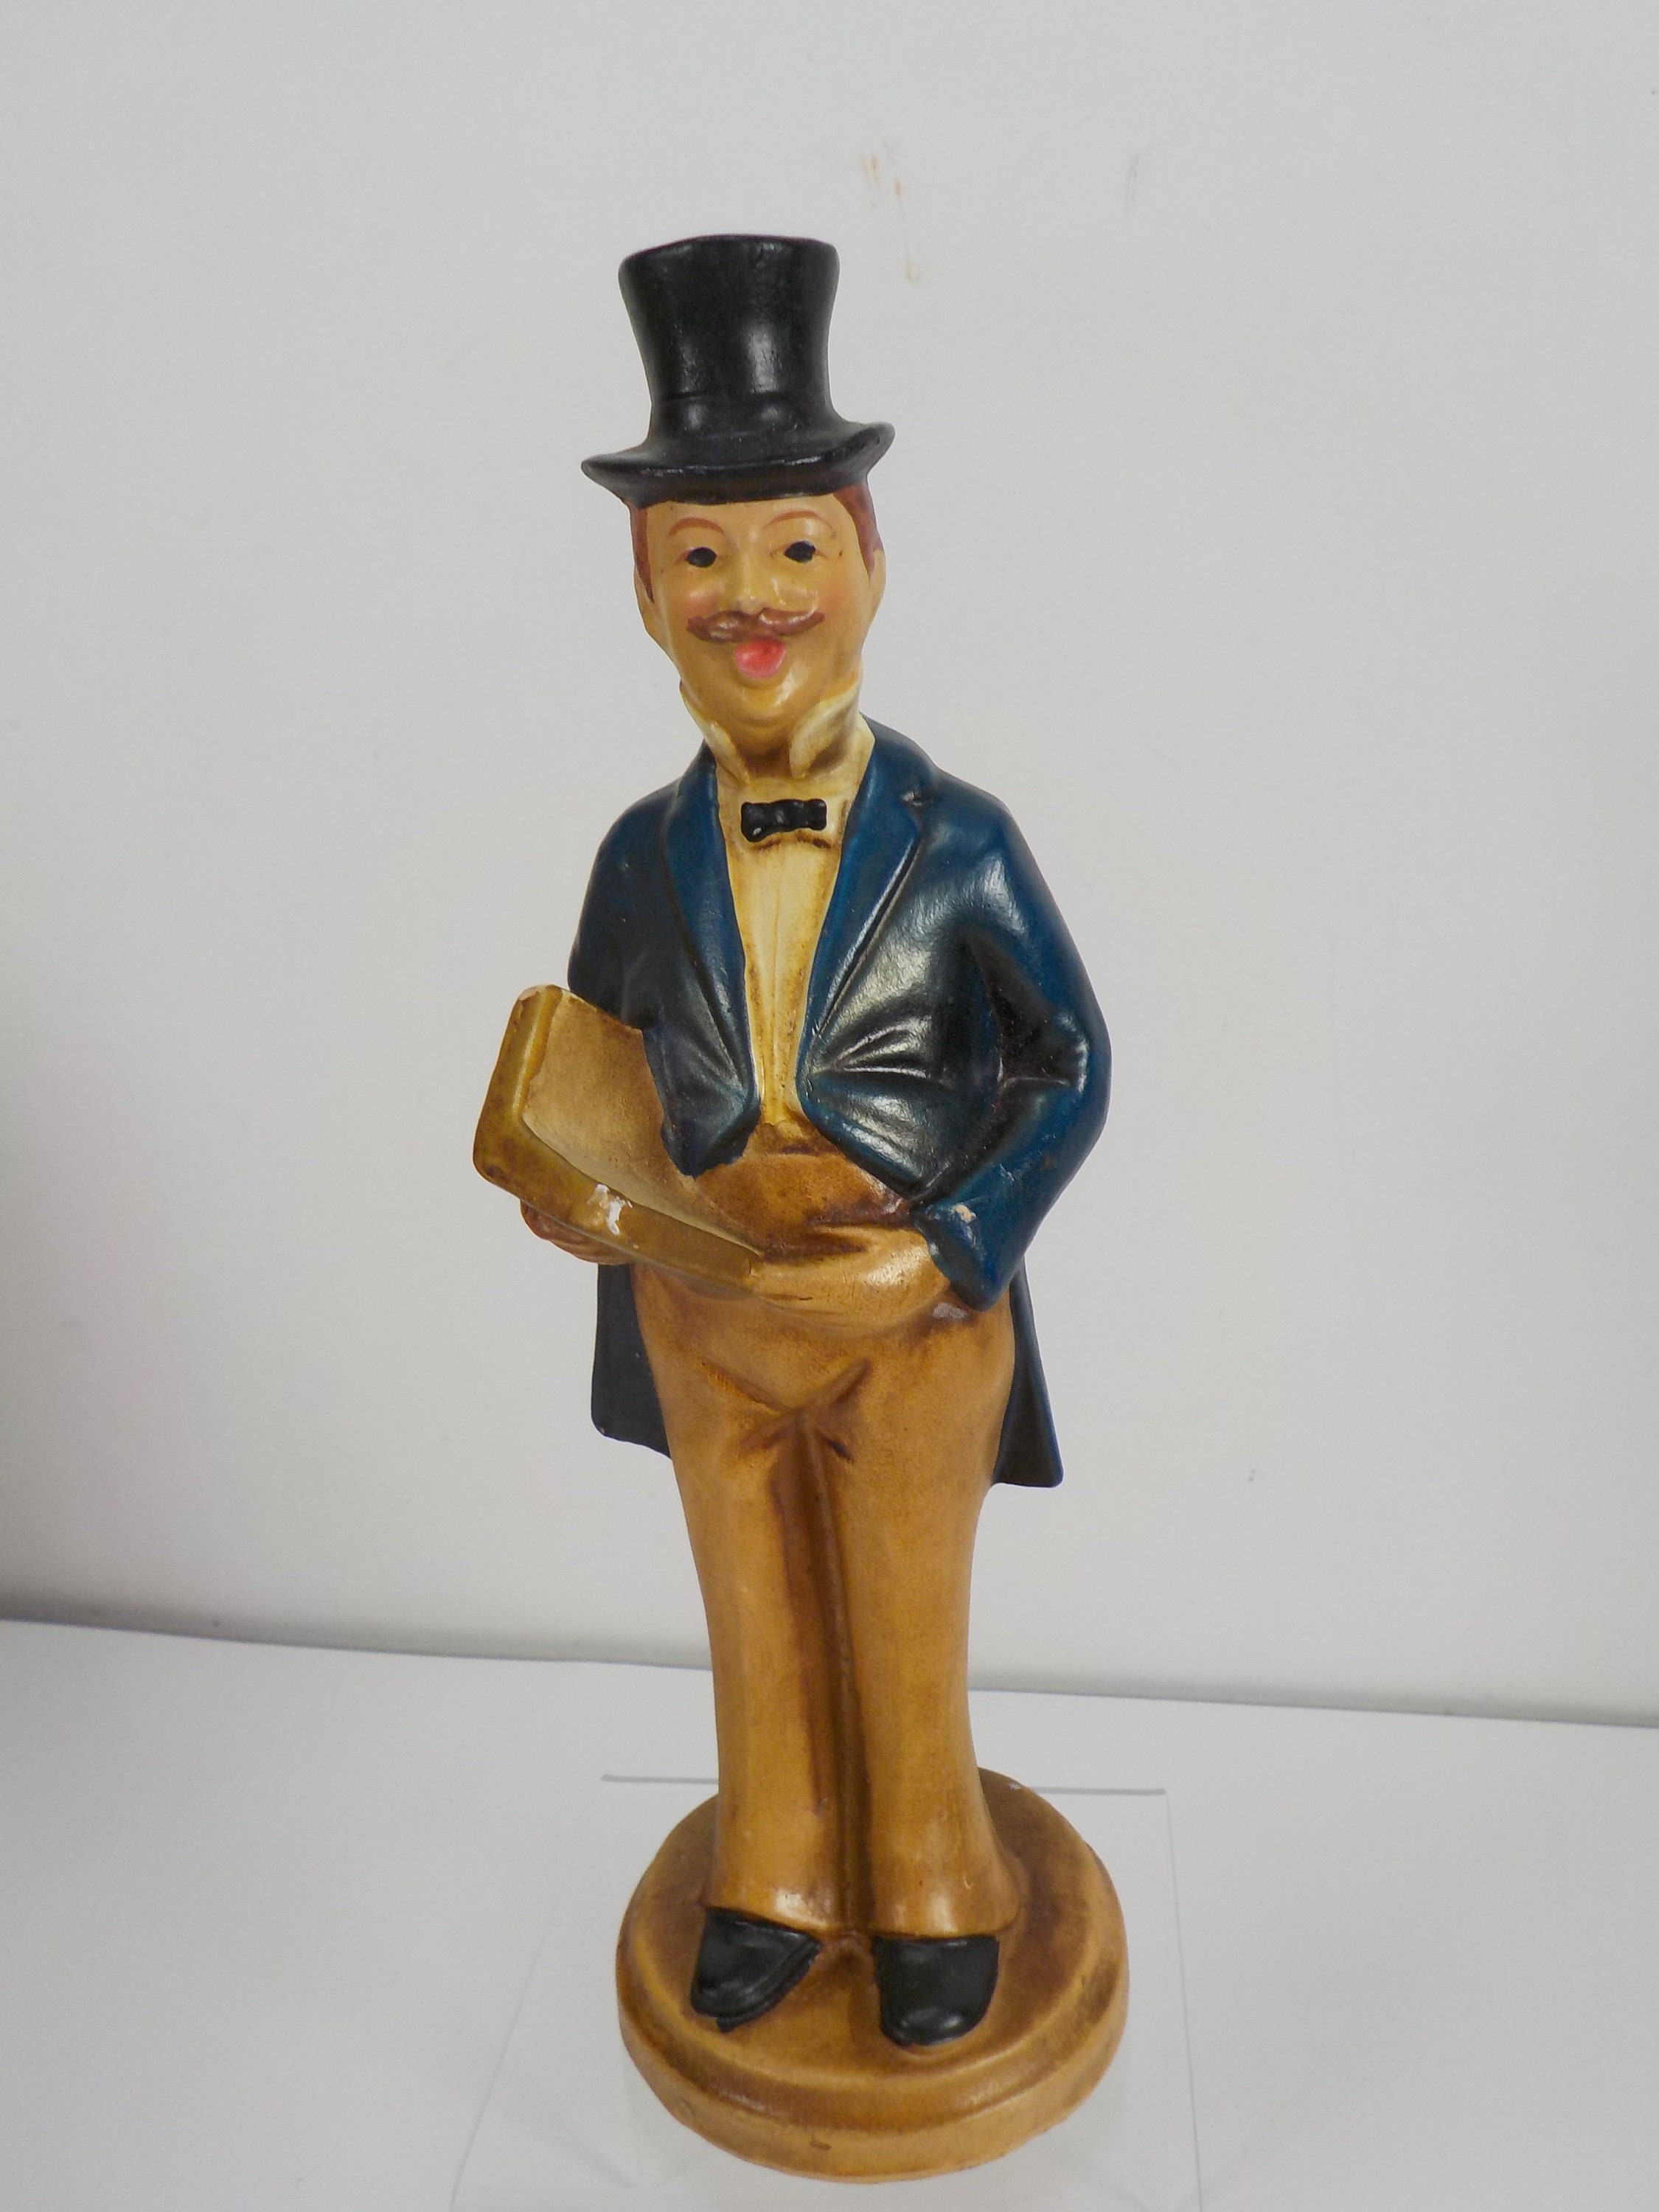 Vintage Christmas Caroler Figurine Holding Book with Real Cotton on His Hat Rare